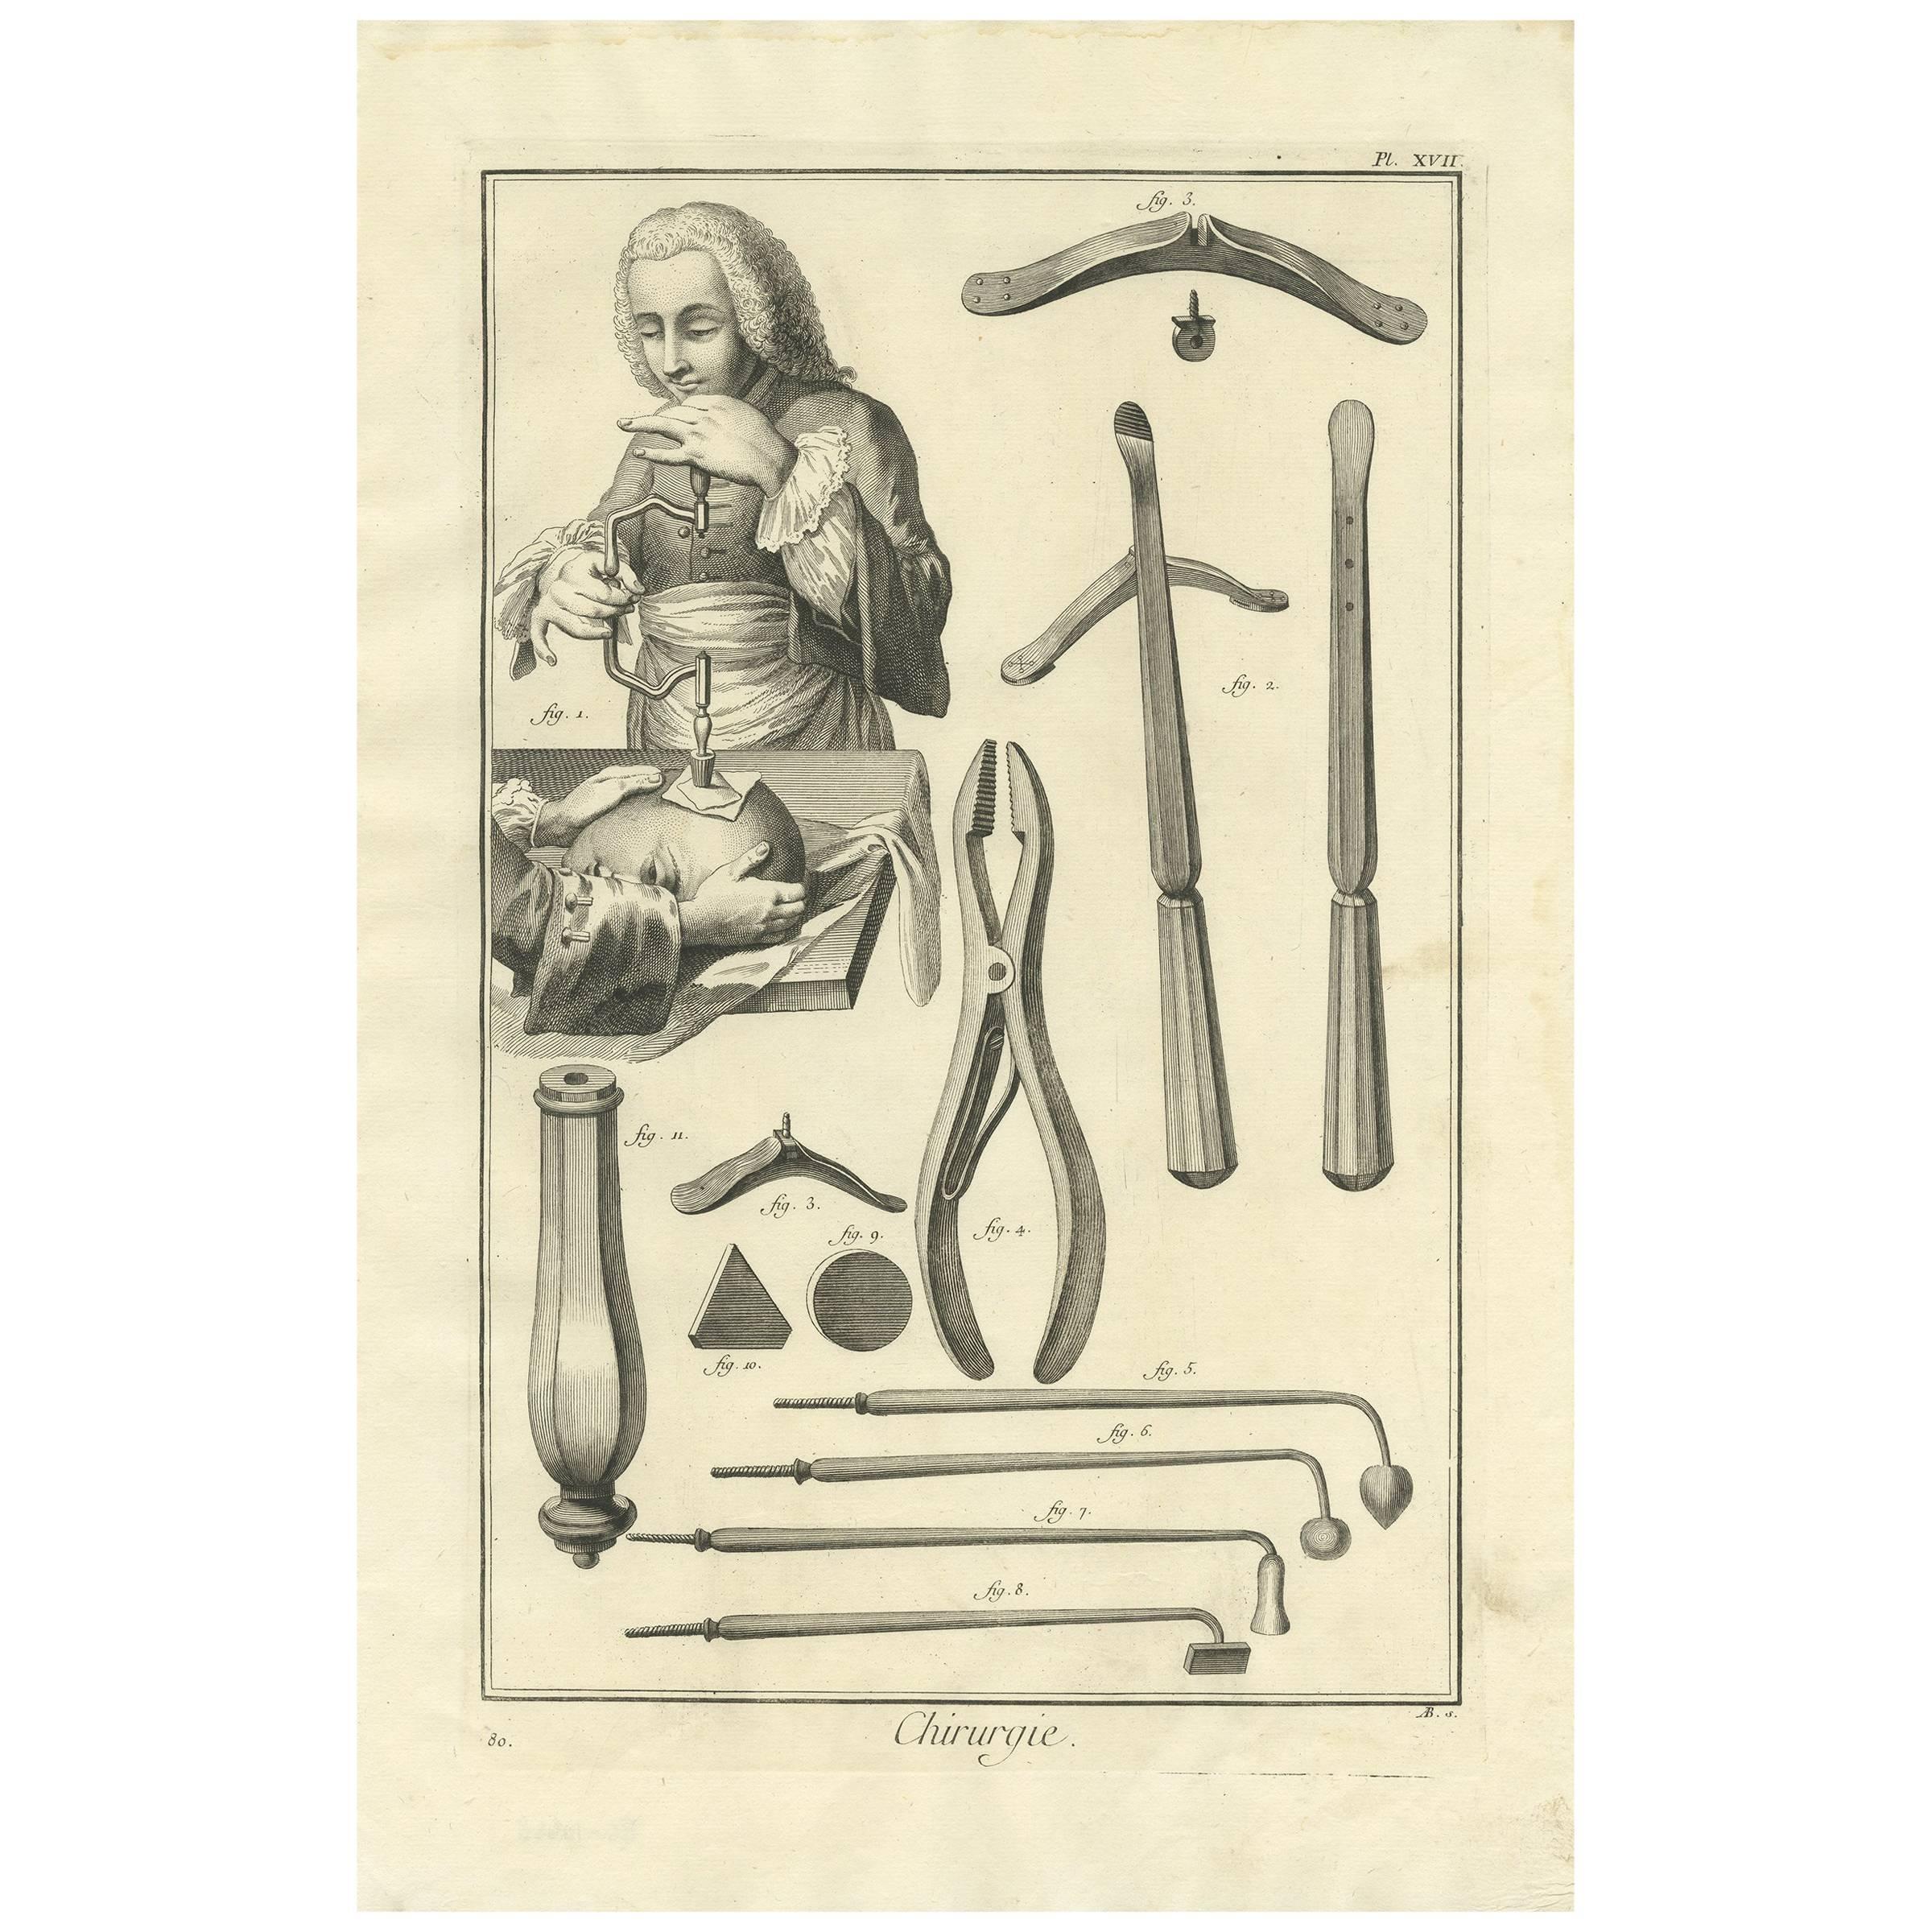 Antique Medical Print 'Pl. XVII' by D. Diderot, circa 1760